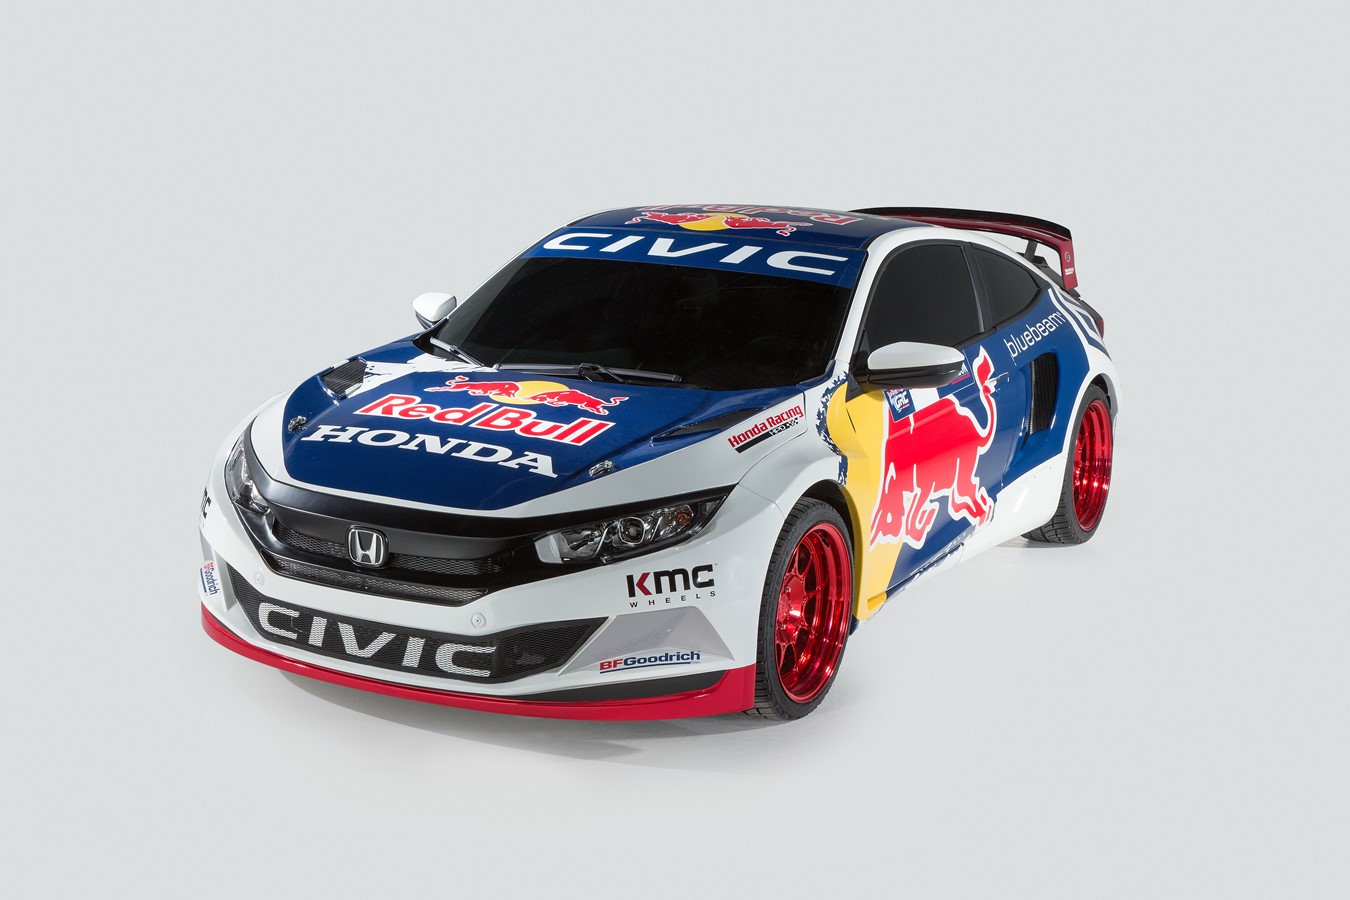 Civic Coupe in Red Bull Global Rallycross racecar livery